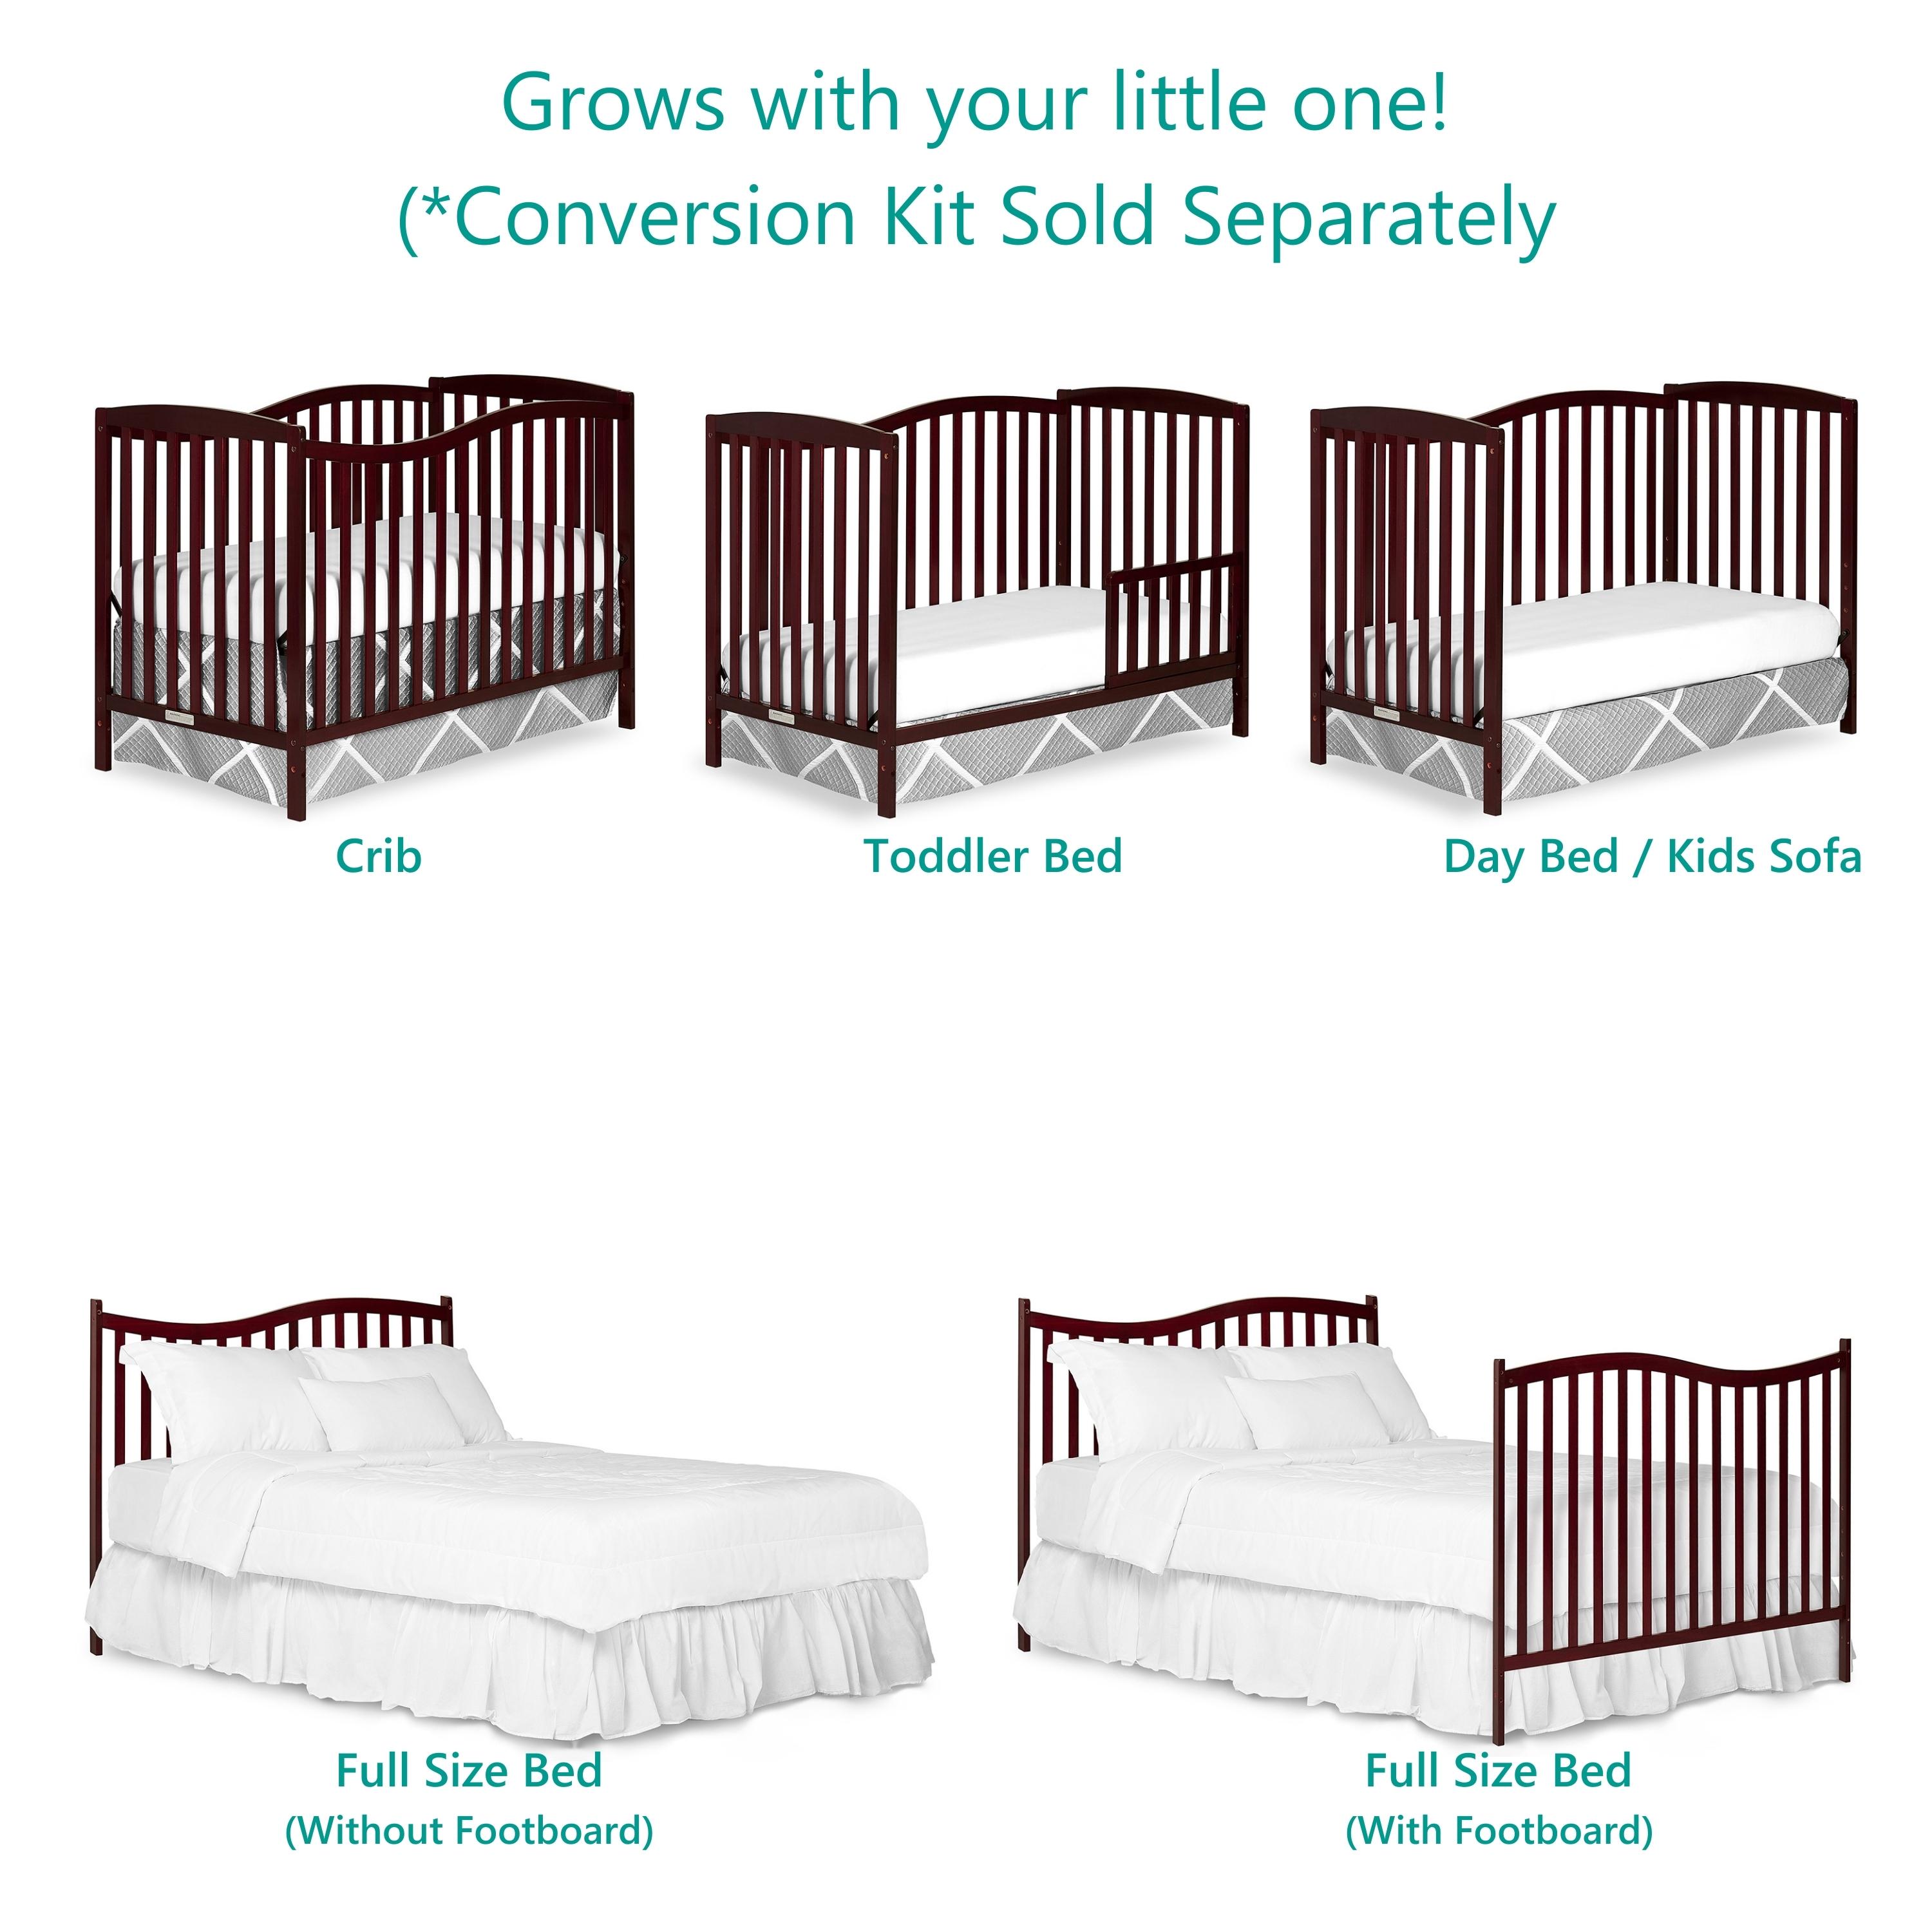 Dream On Me Chelsea 5-in-1 Convertible Crib, JPMA Certified, Cherry - image 5 of 13